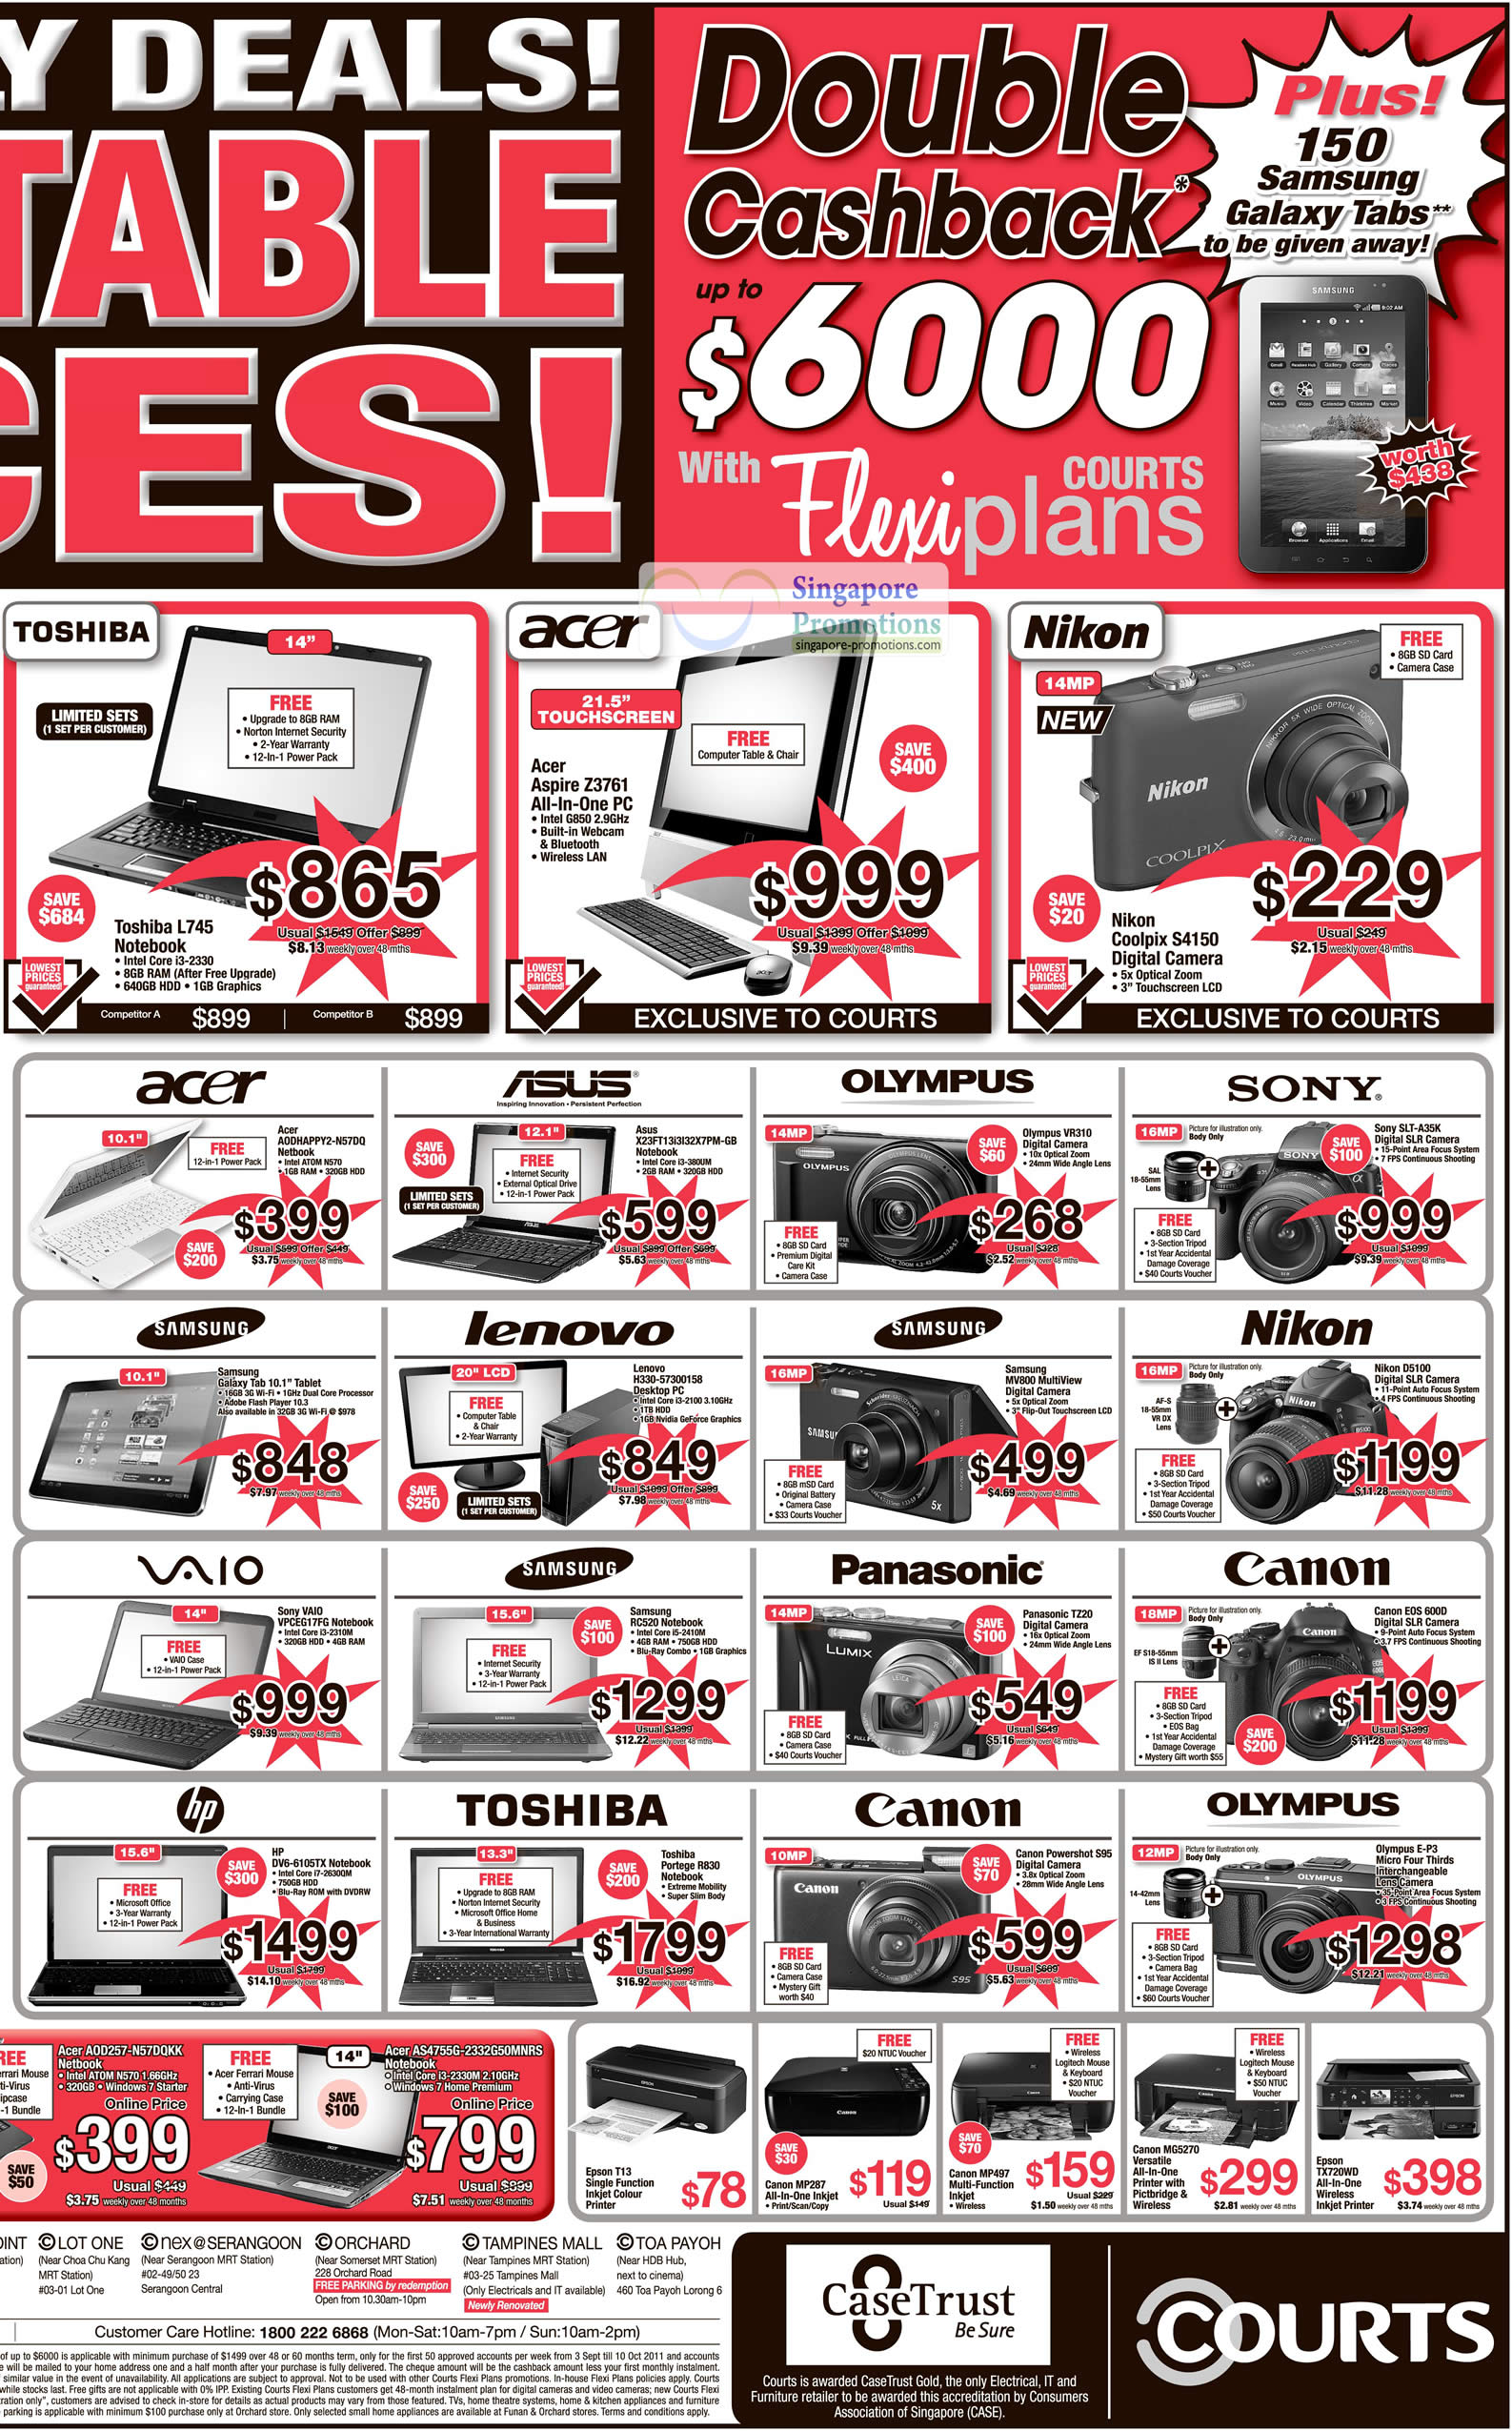 Featured image for Courts Islandwide Sale Special Offers 1 Oct 2011